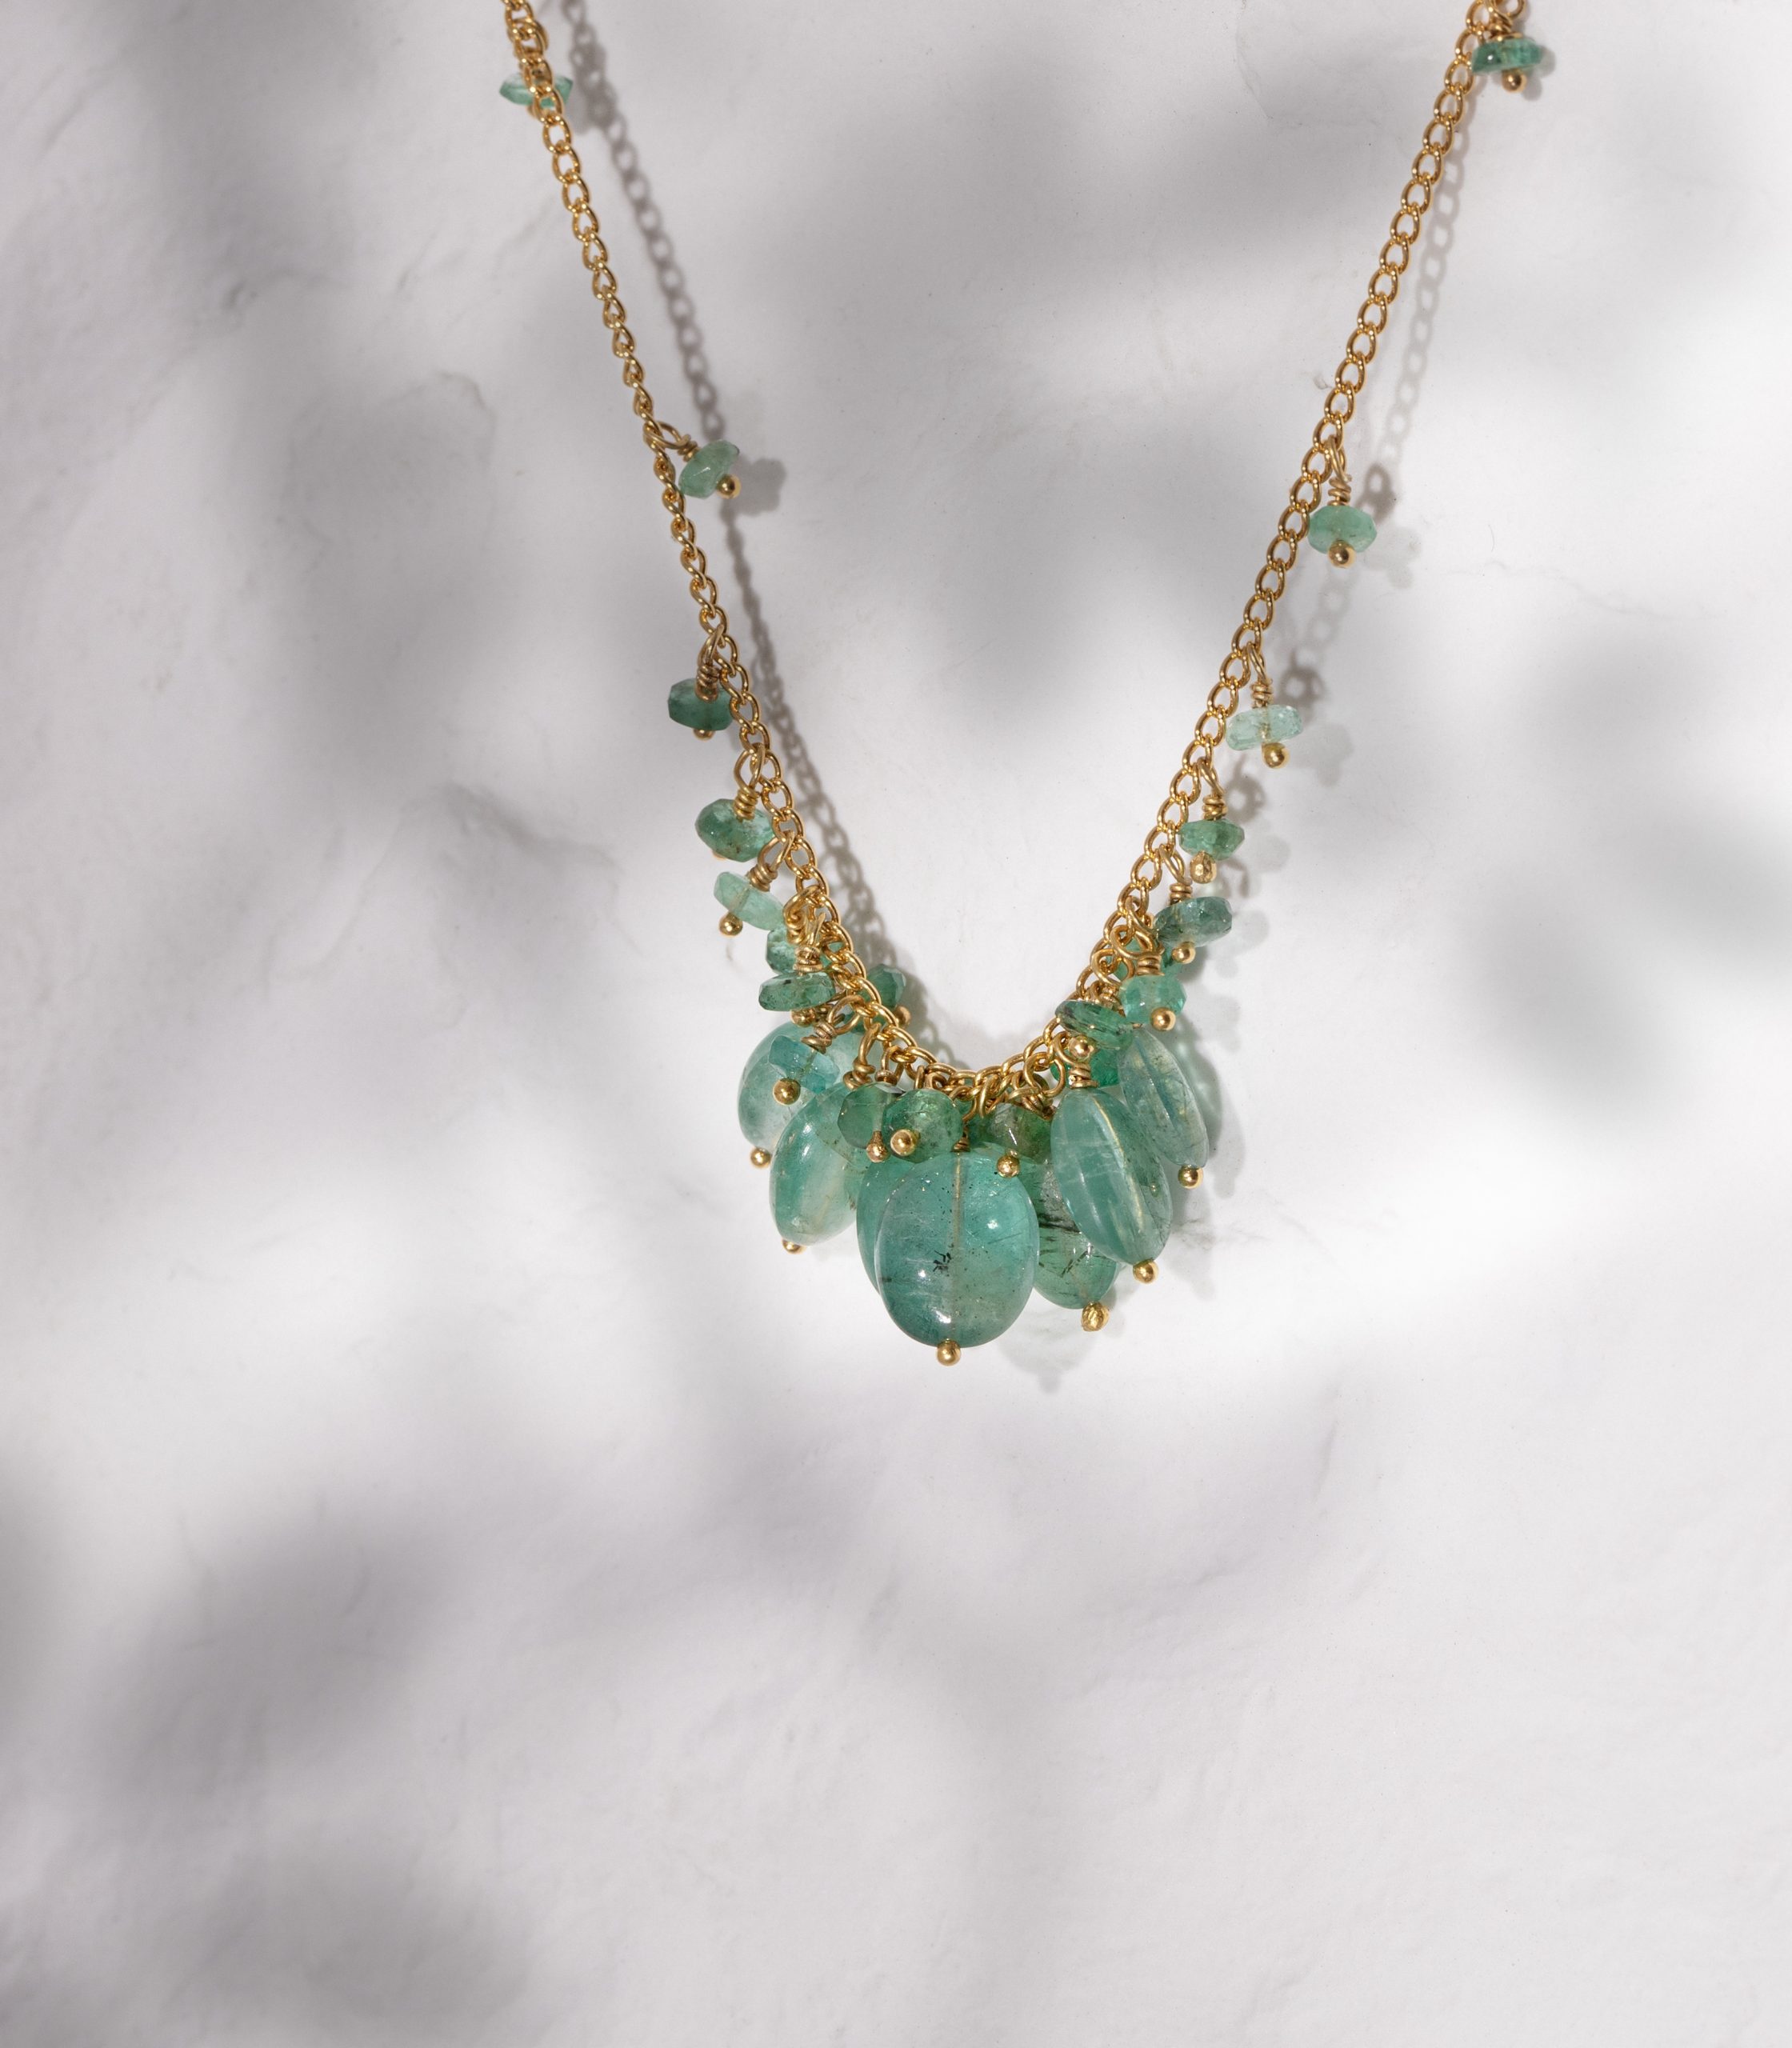 Emerald necklace with oval beads